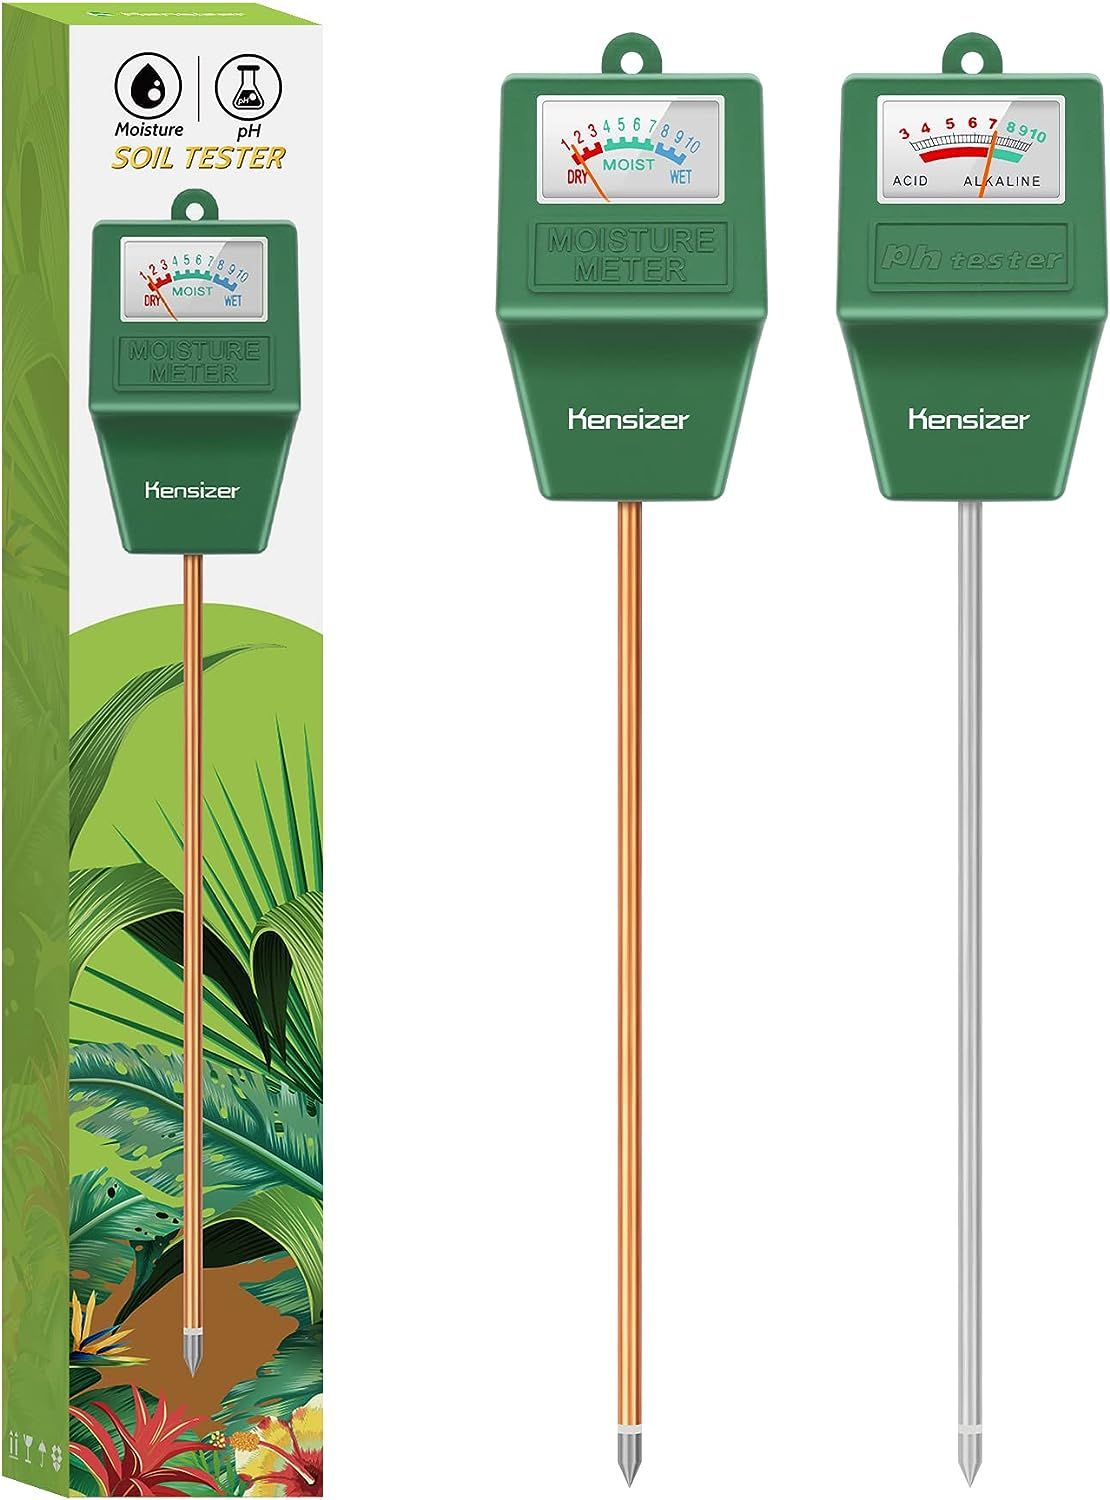 Moisture meter for plants - Must see before buying and using 